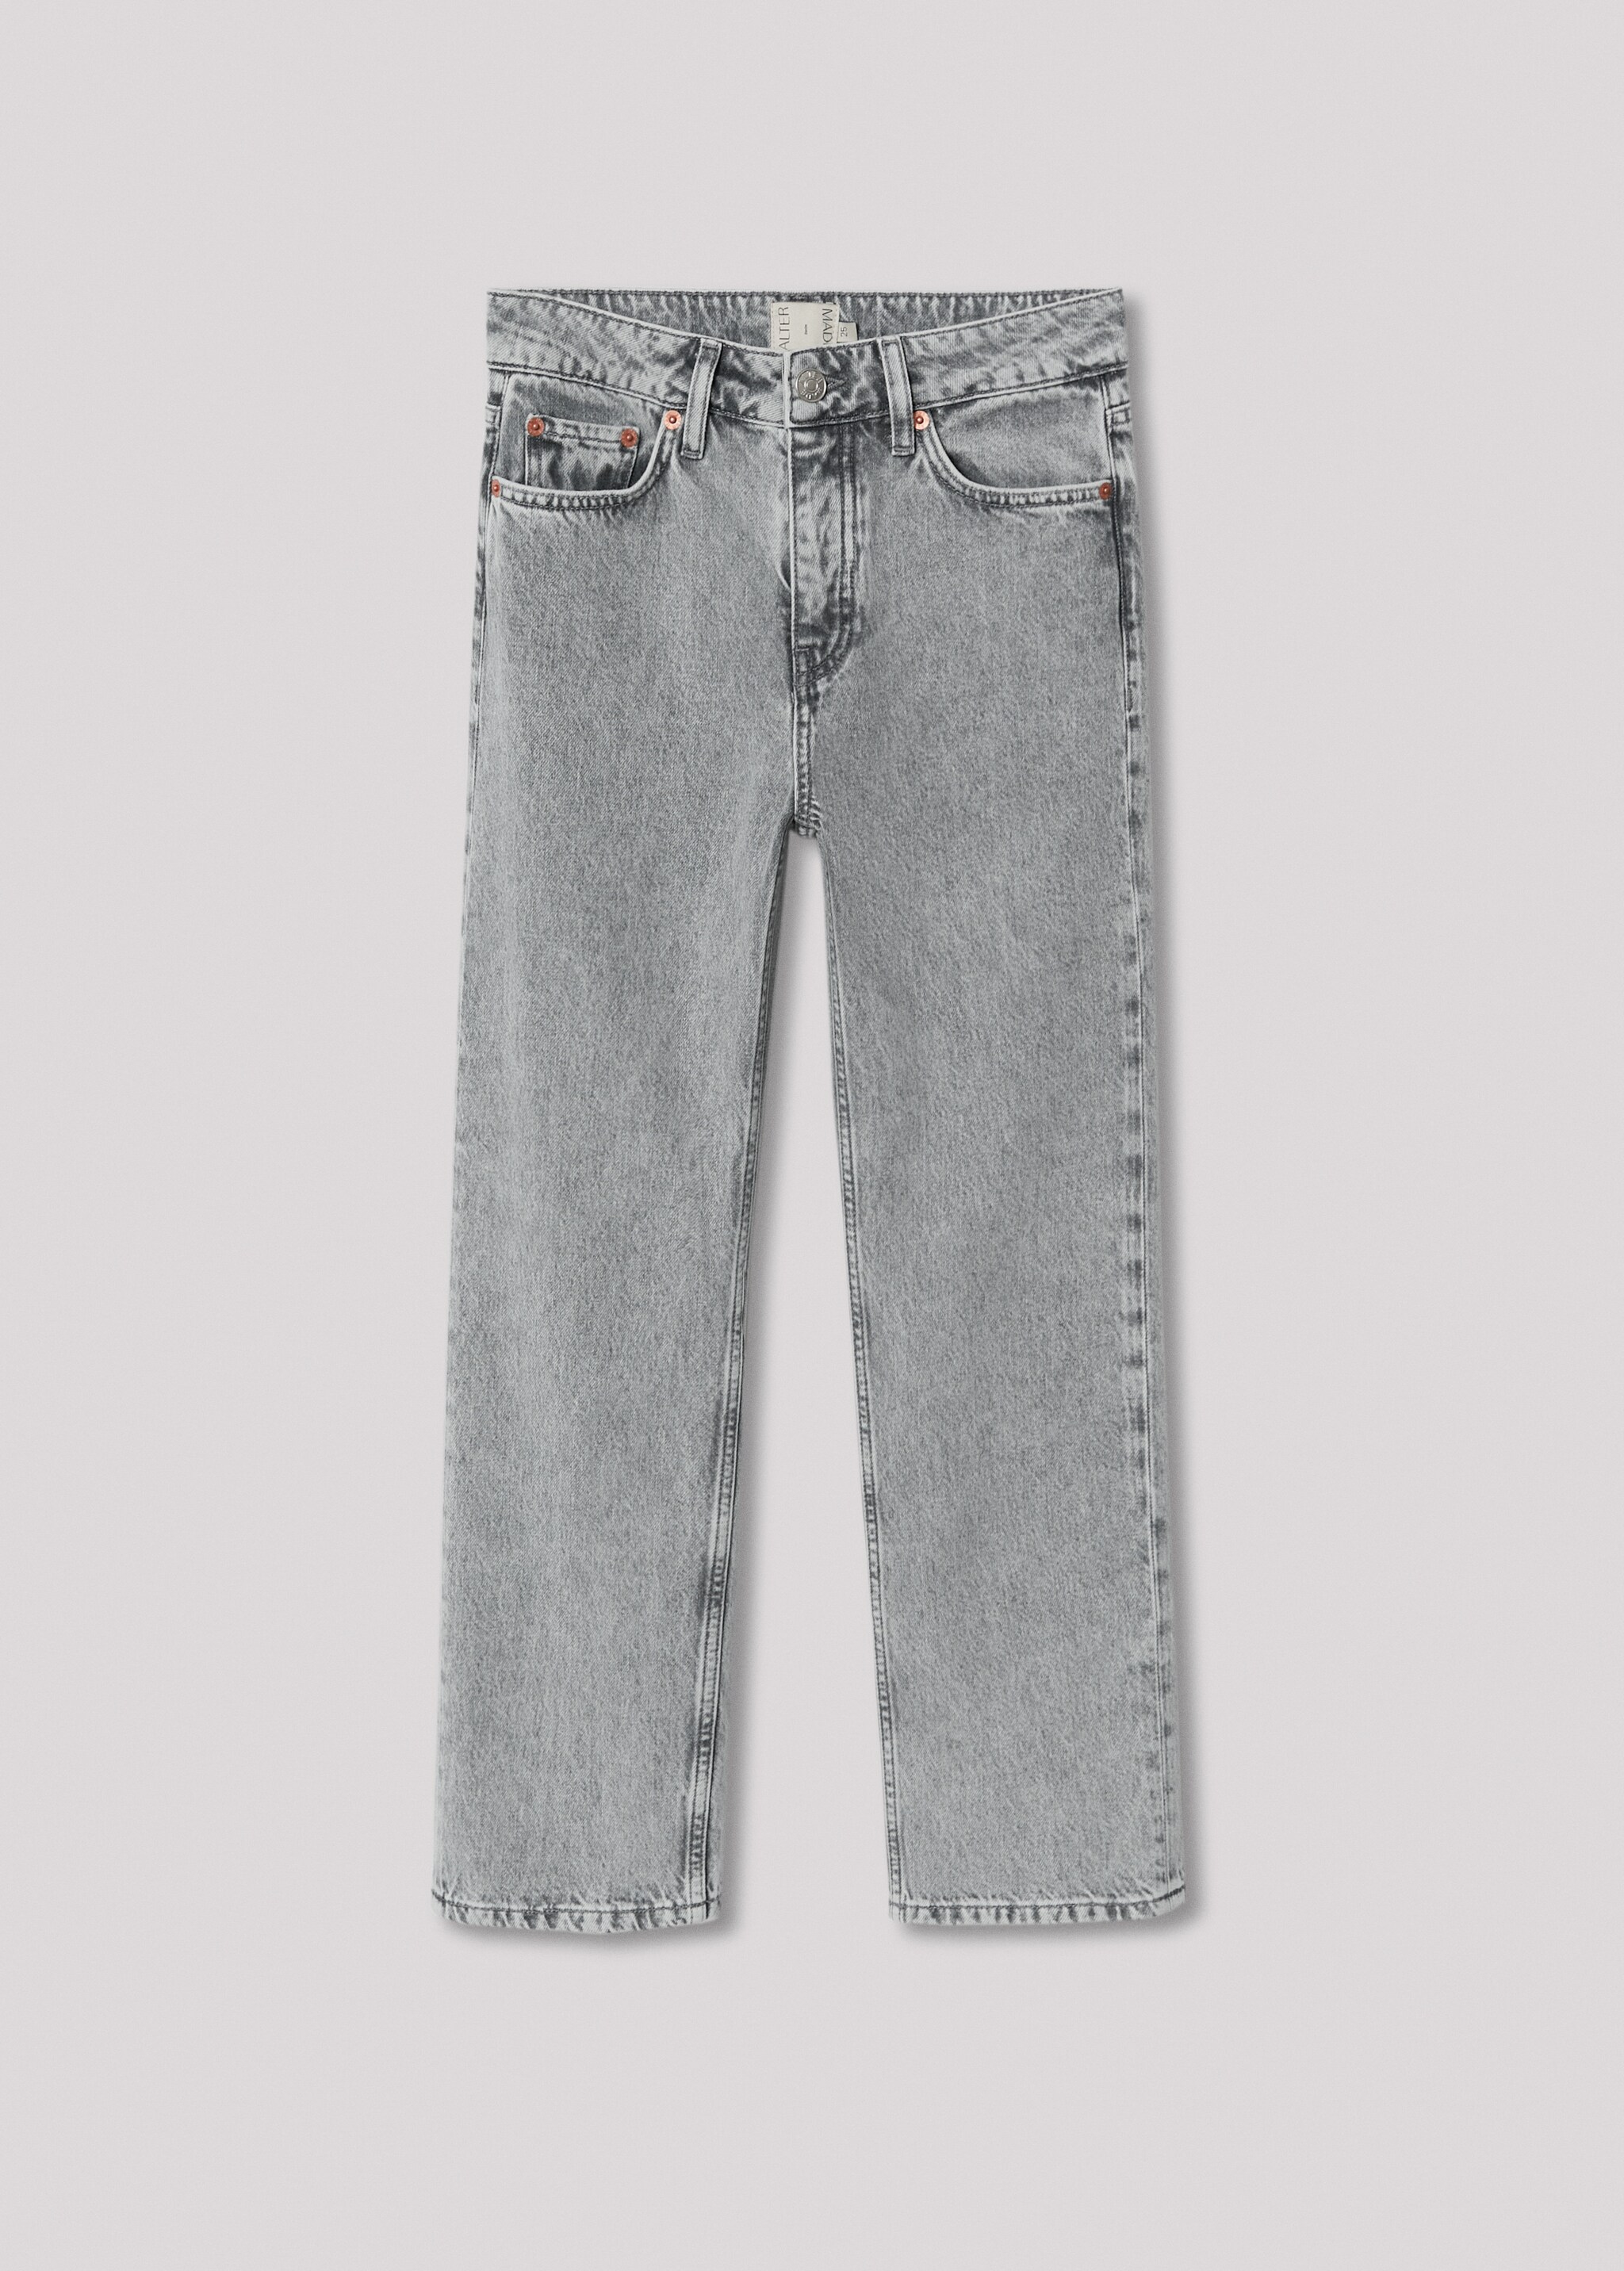 Straight crop jeans - Article without model